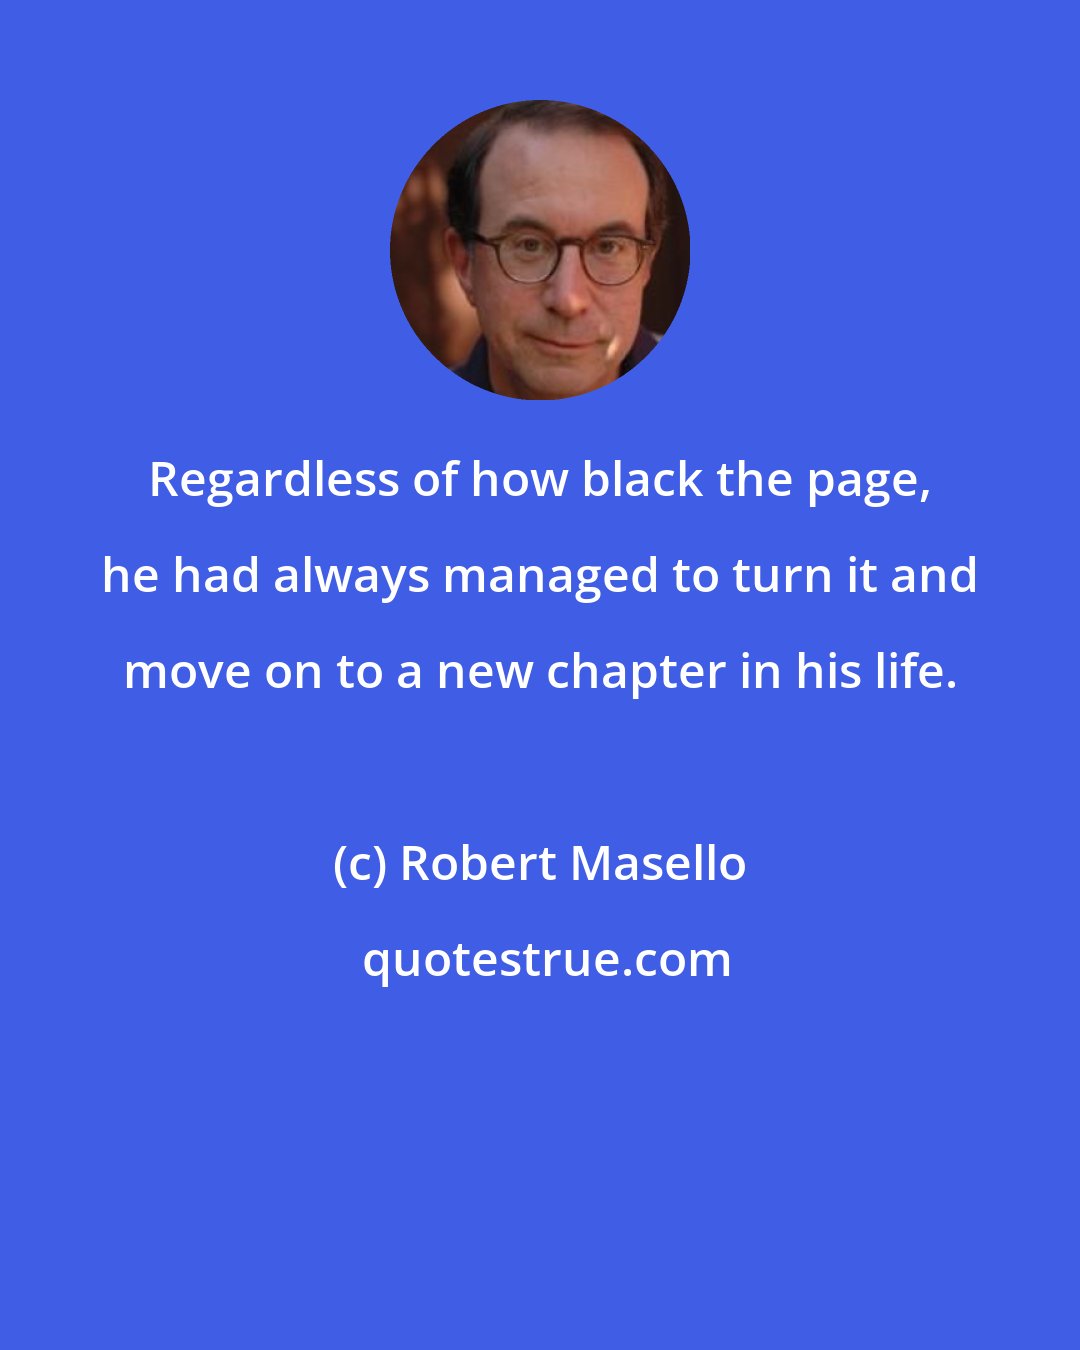 Robert Masello: Regardless of how black the page, he had always managed to turn it and move on to a new chapter in his life.